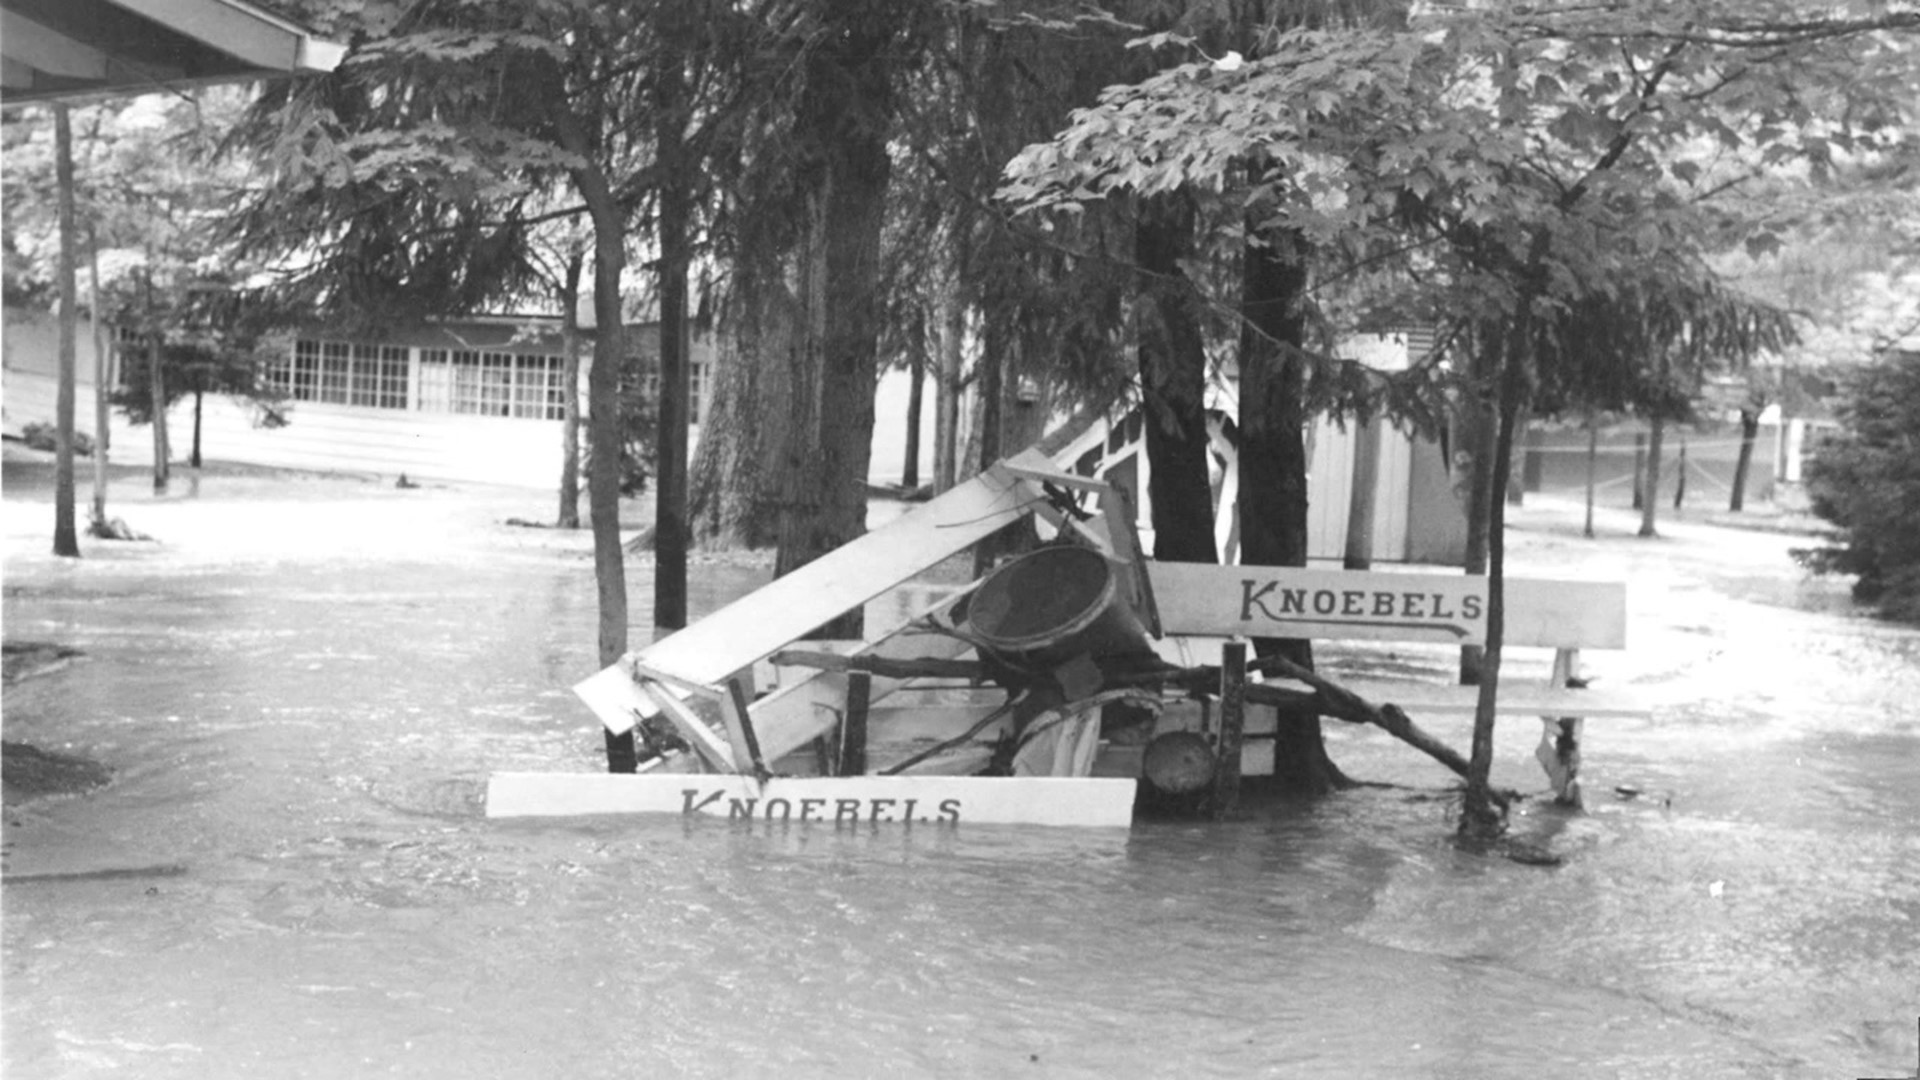 The Knoebels say the flood of 1972 set the tone for how they have responded to other weather events at the park.